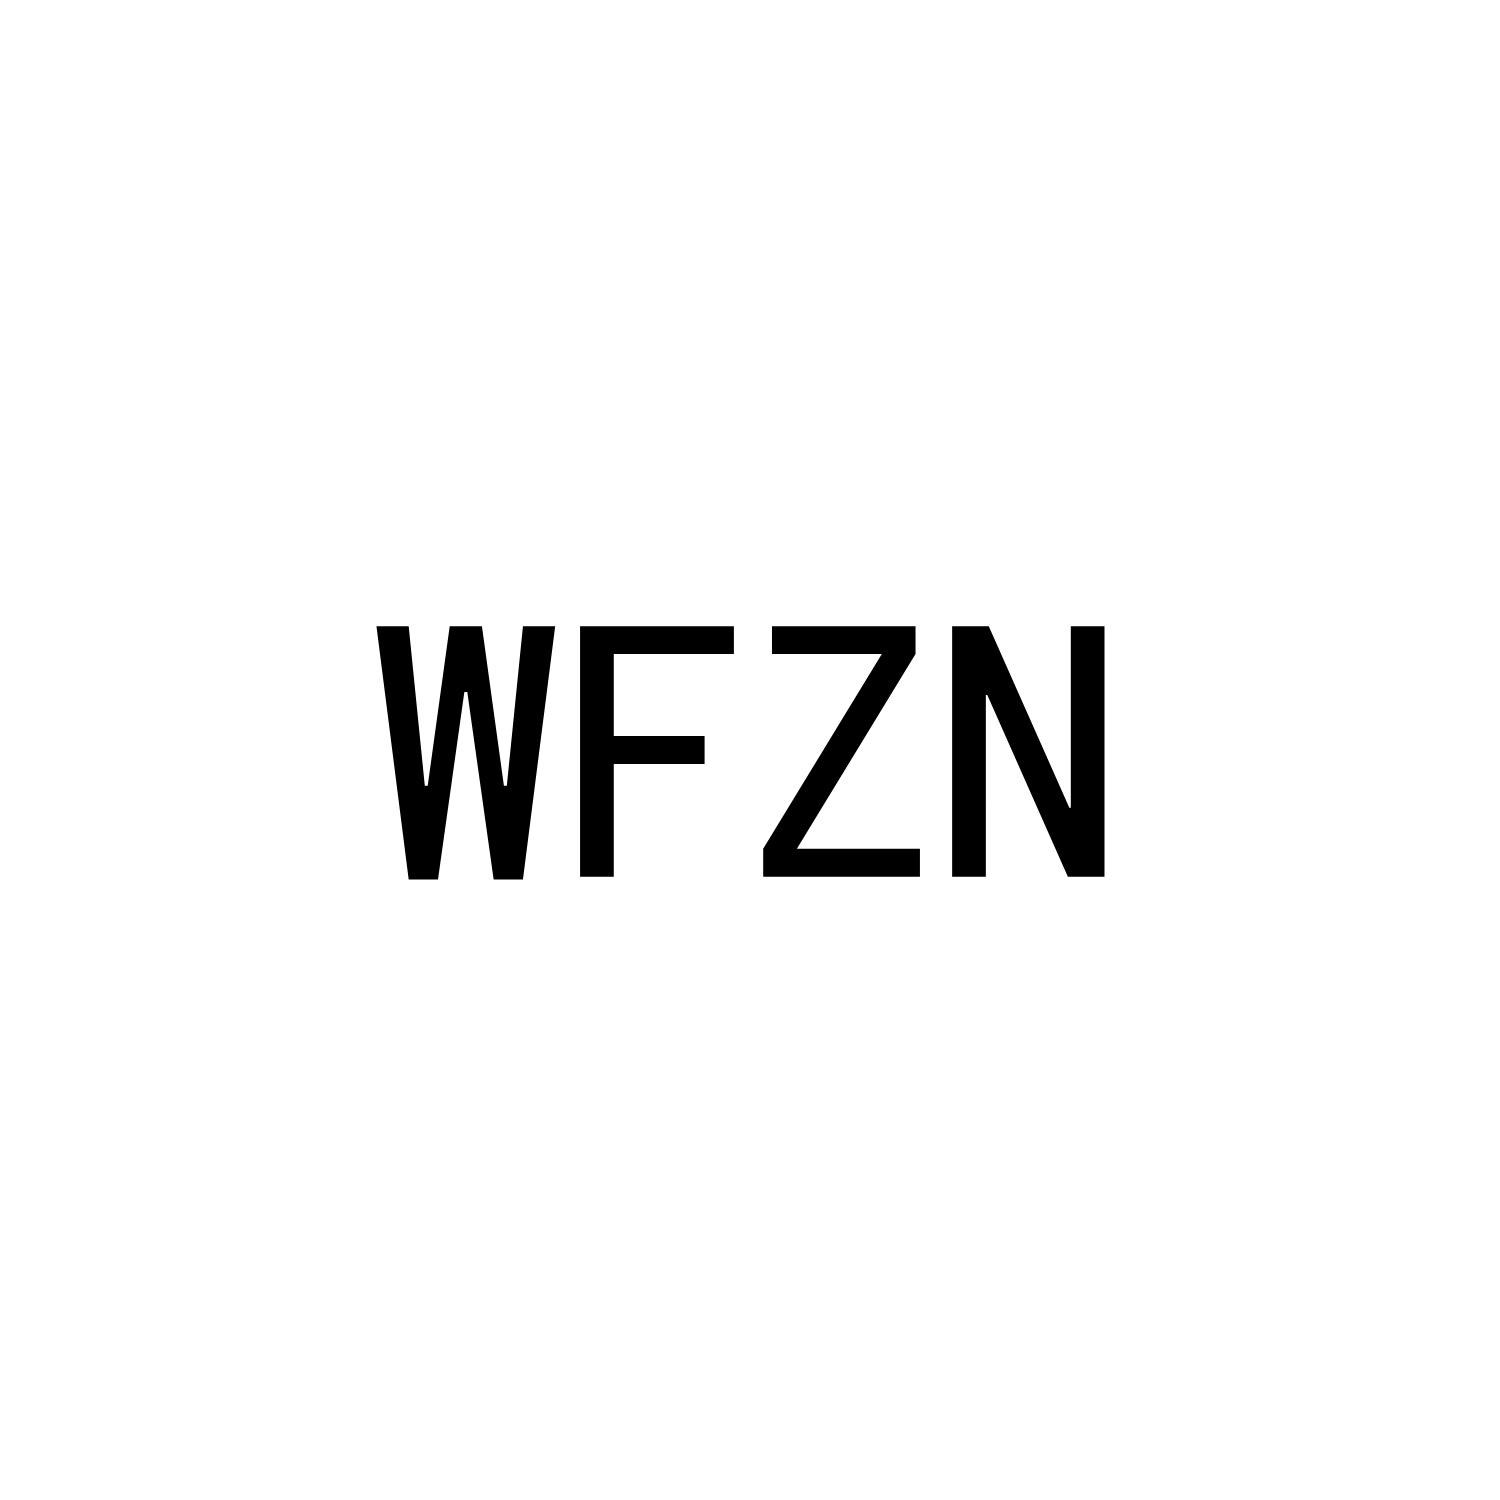 WFZN